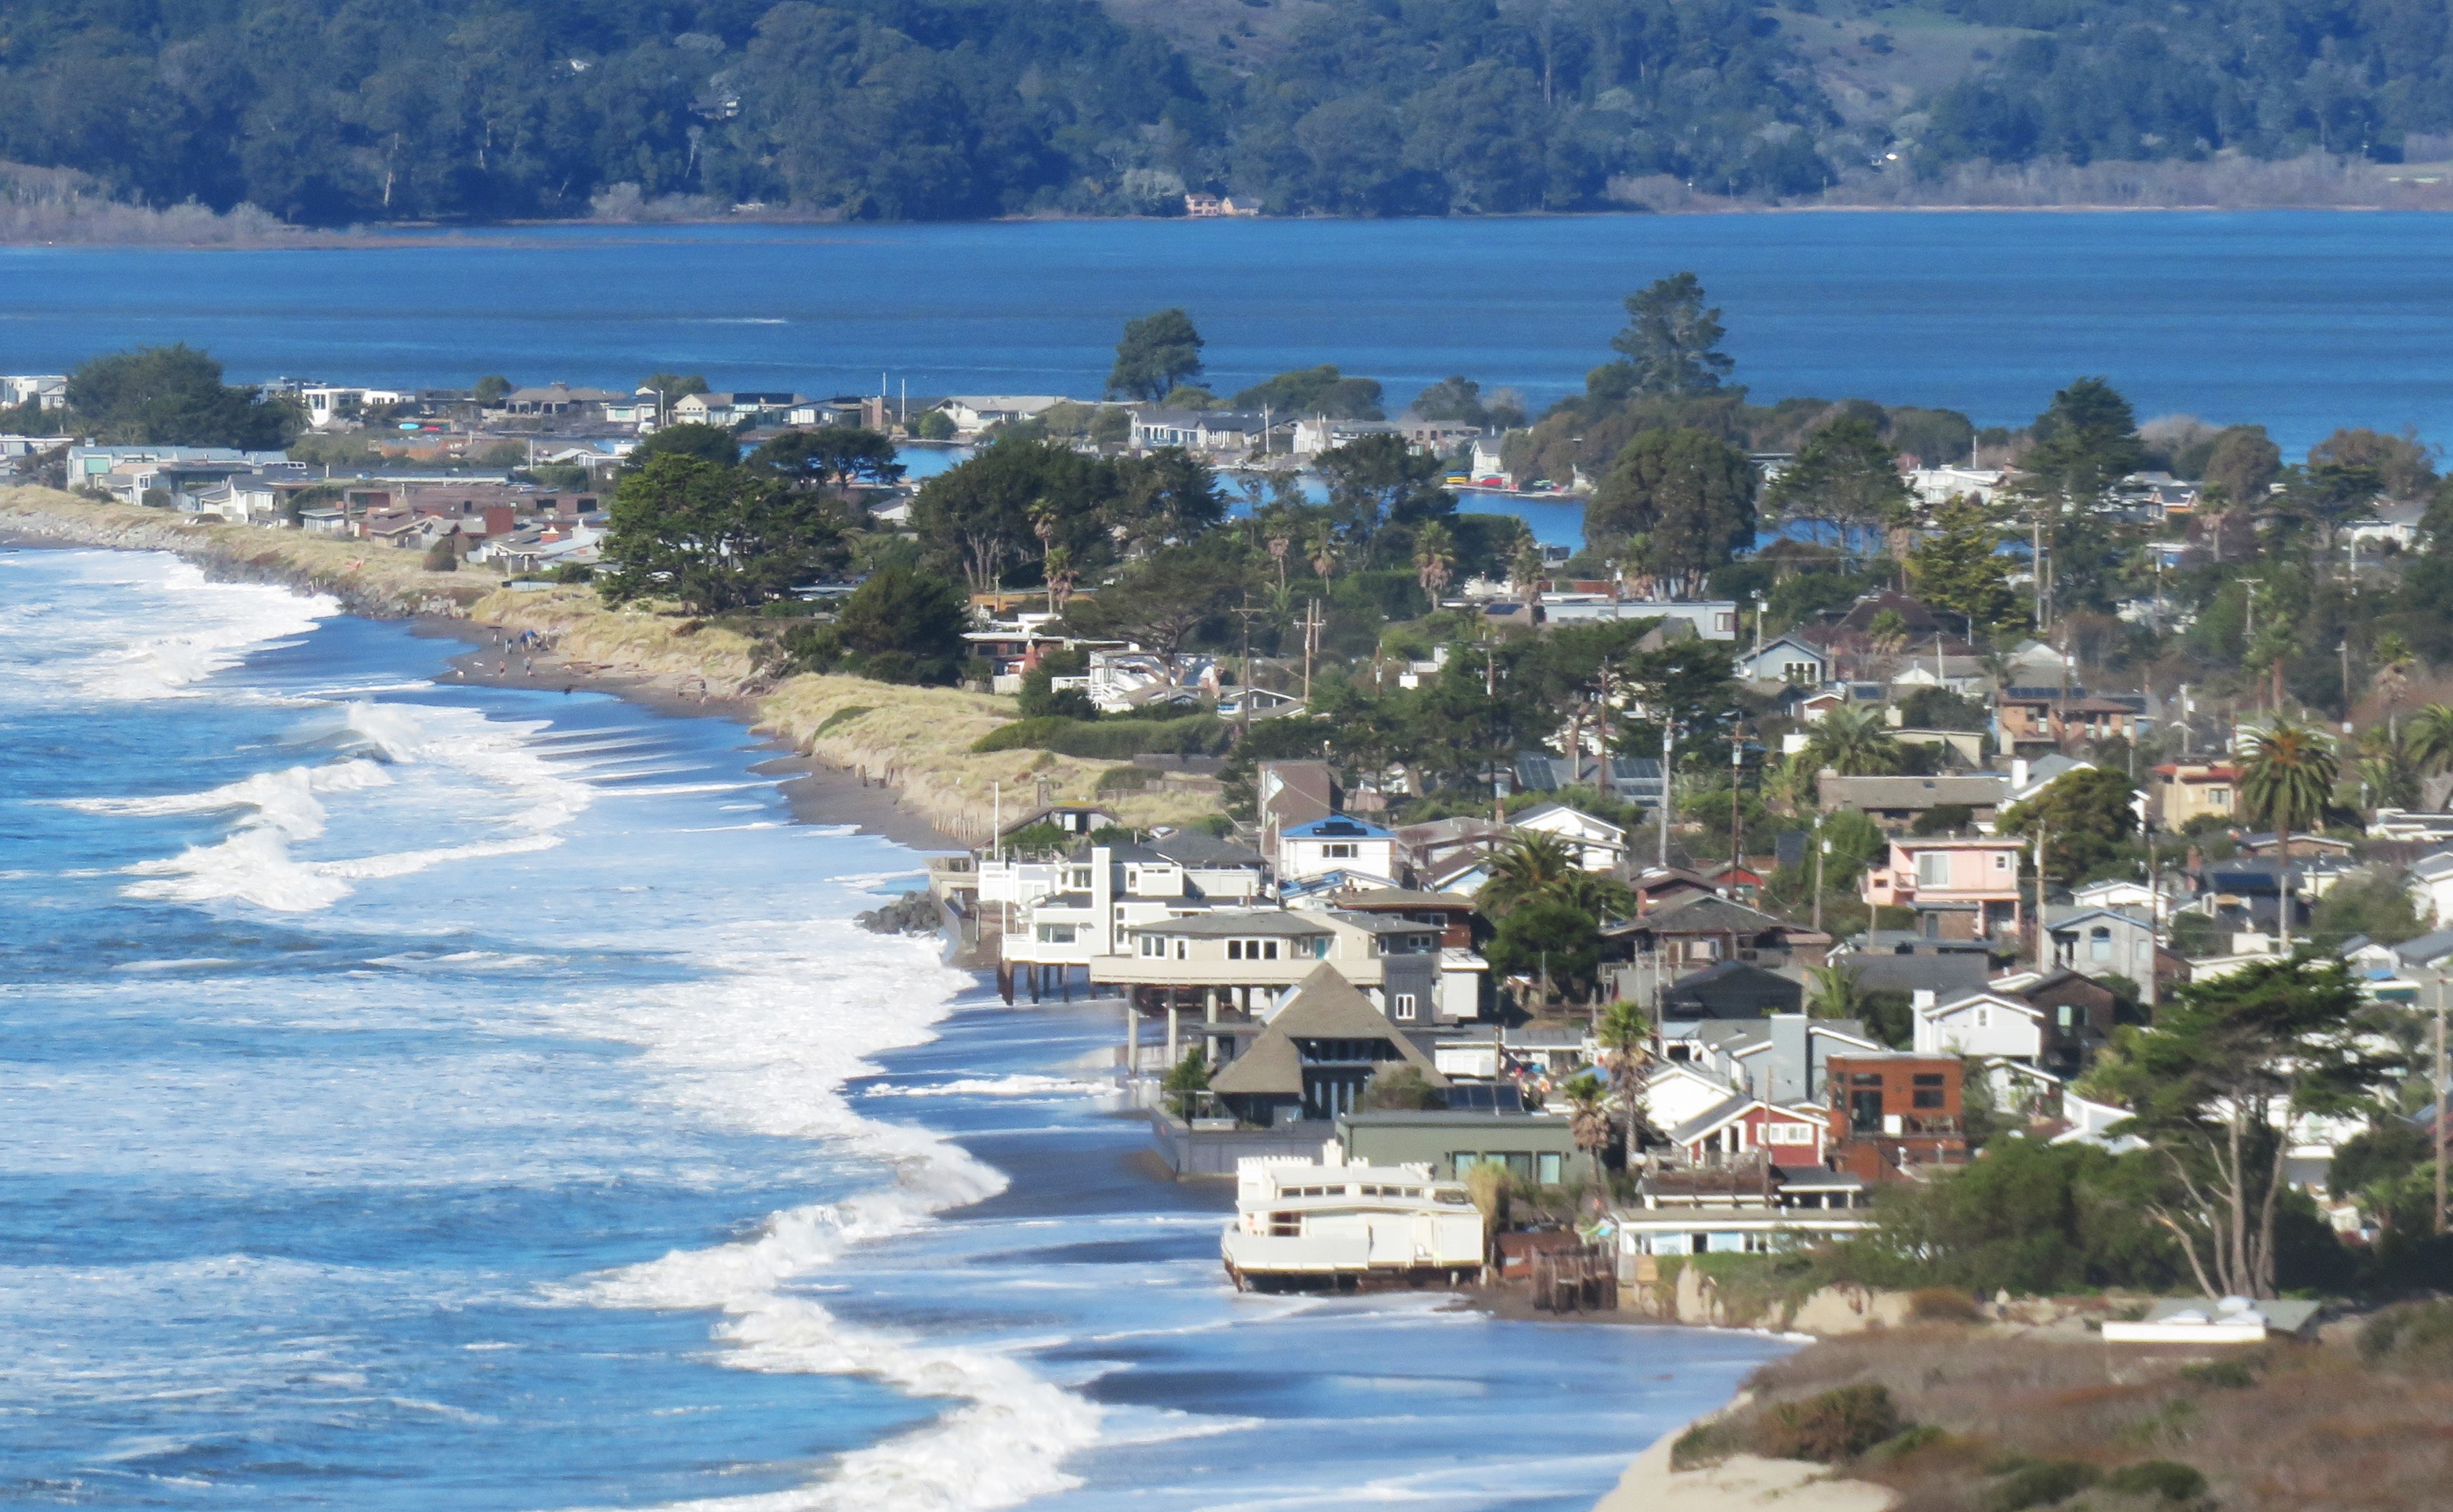 Homes in Stinson Beach, seen from a hill.